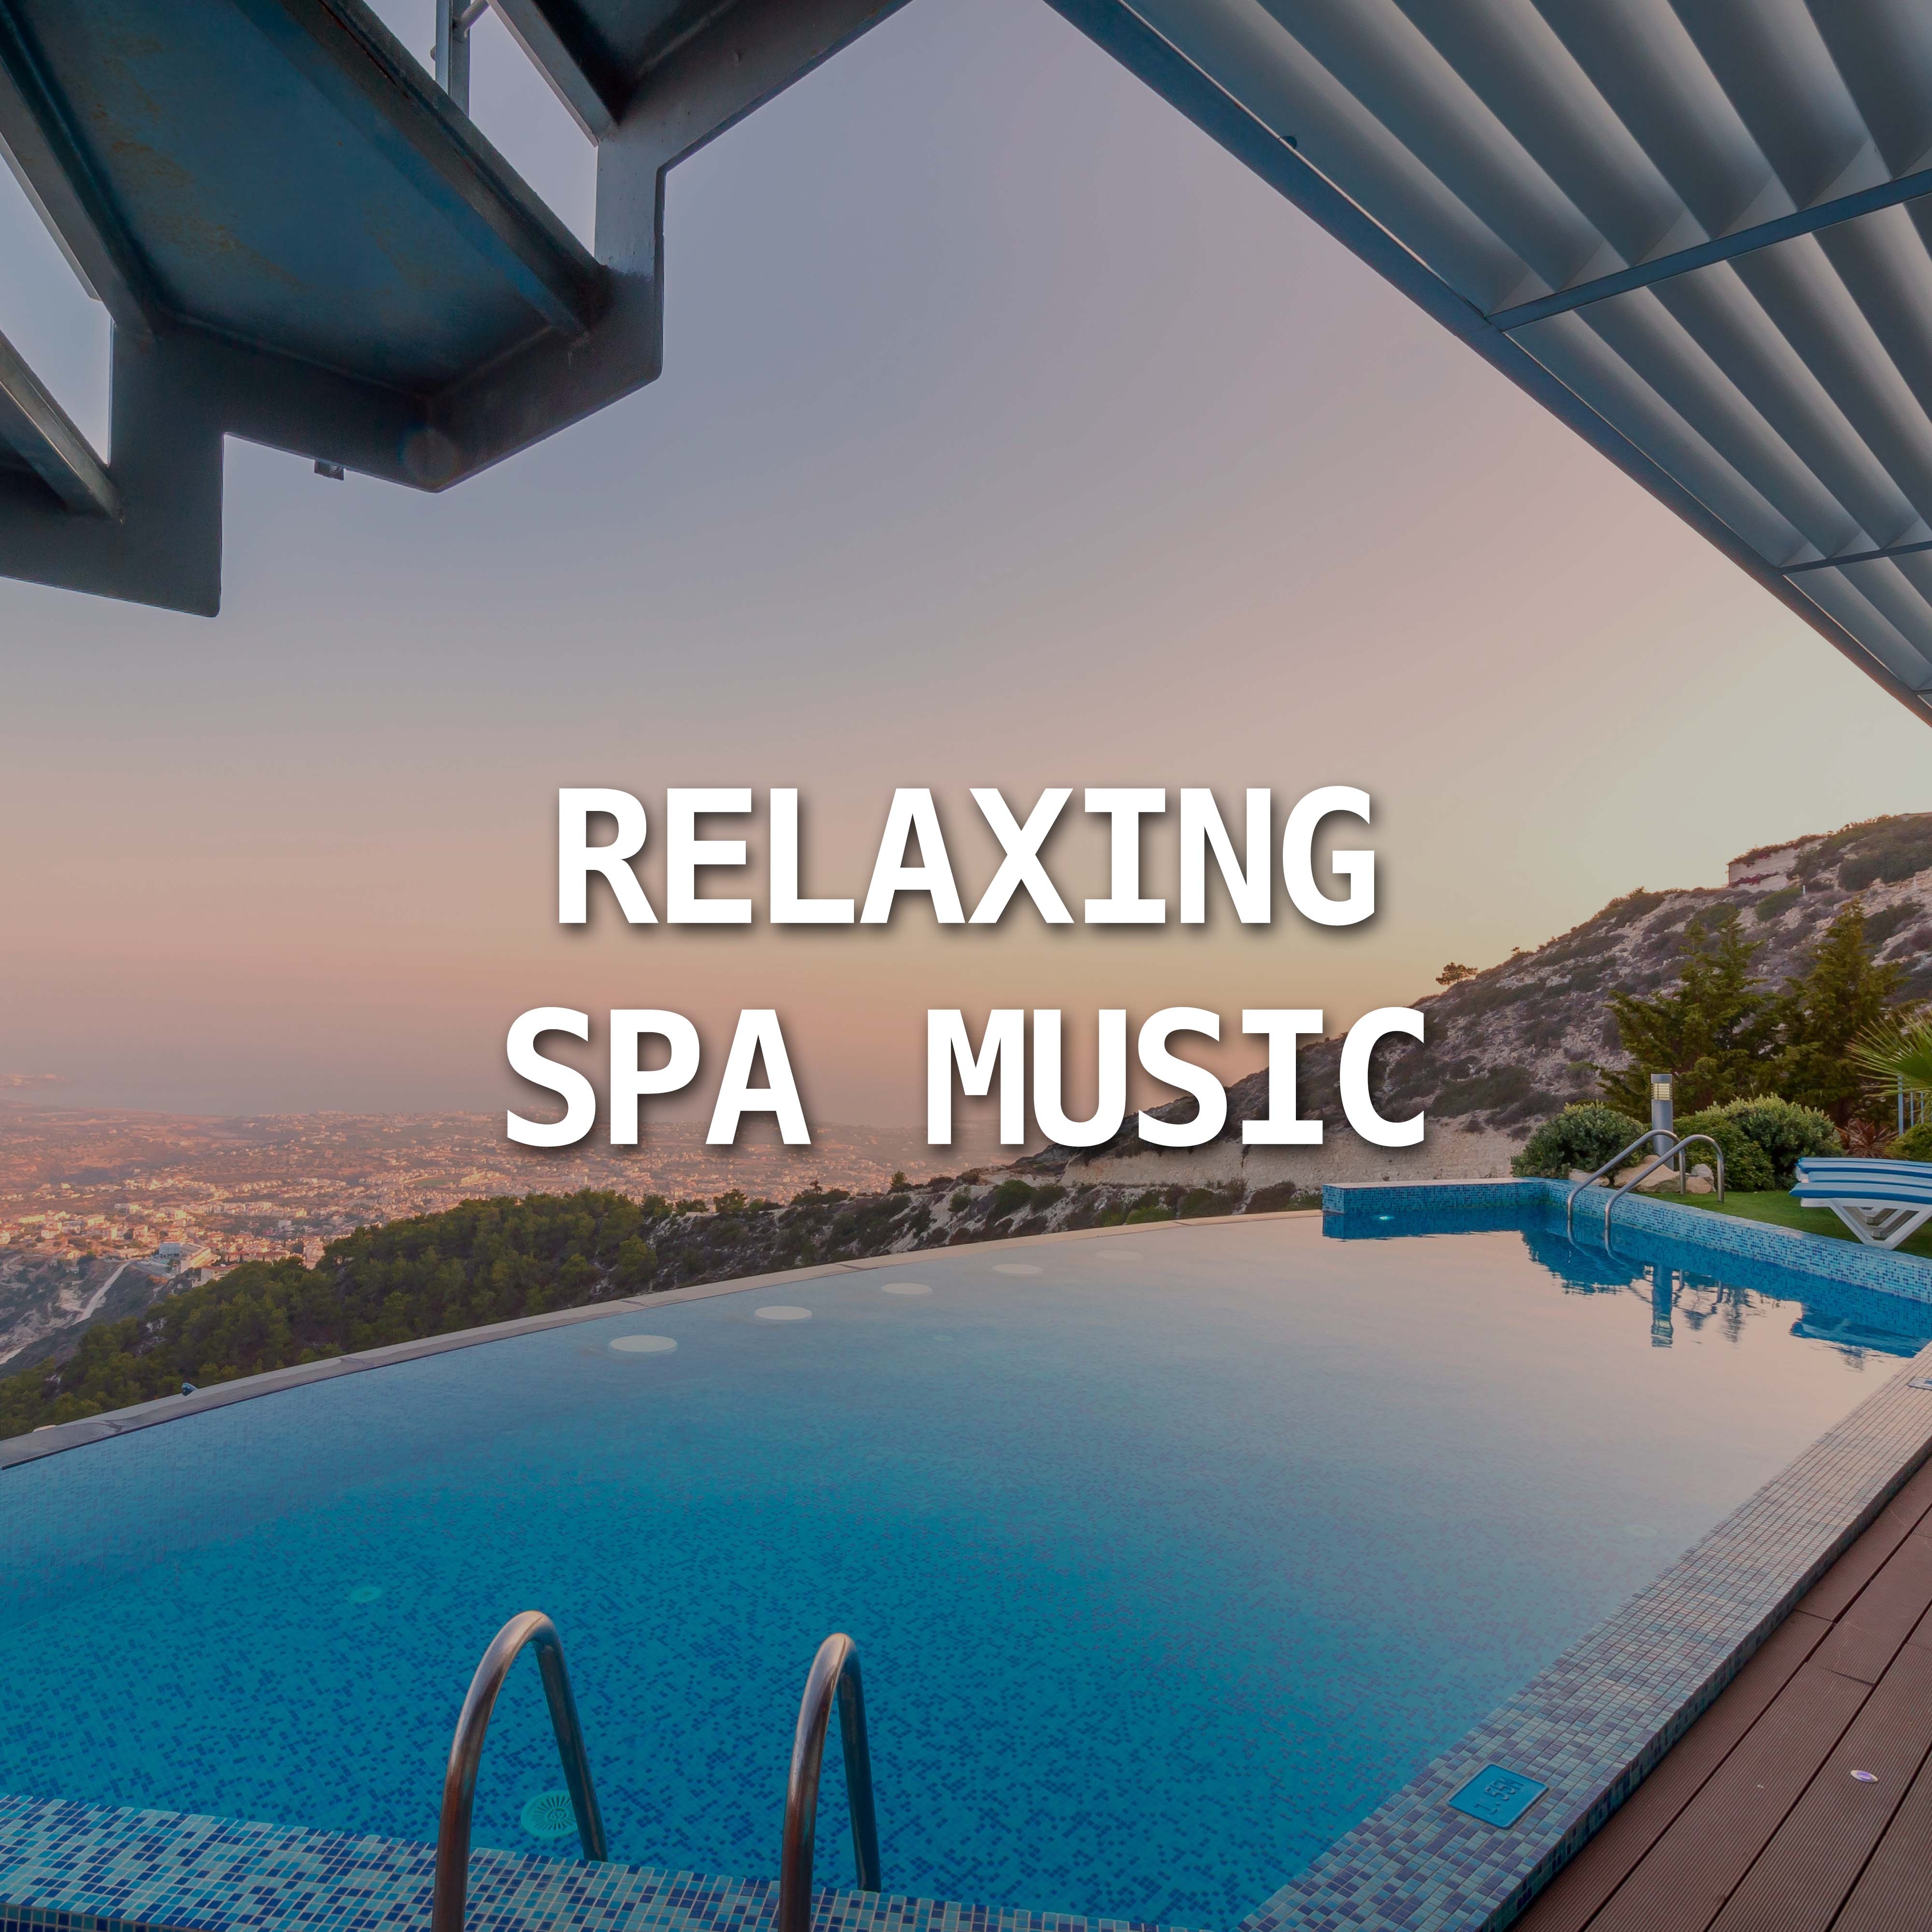 Relaxing SPA Music - Relaxing Spa Music for Spa Massage Therapy, Health-related purposes, Relieve pain, Reduce stress, Increase relaxation, Address Anxiety and Depression, and Aid General Wellness.